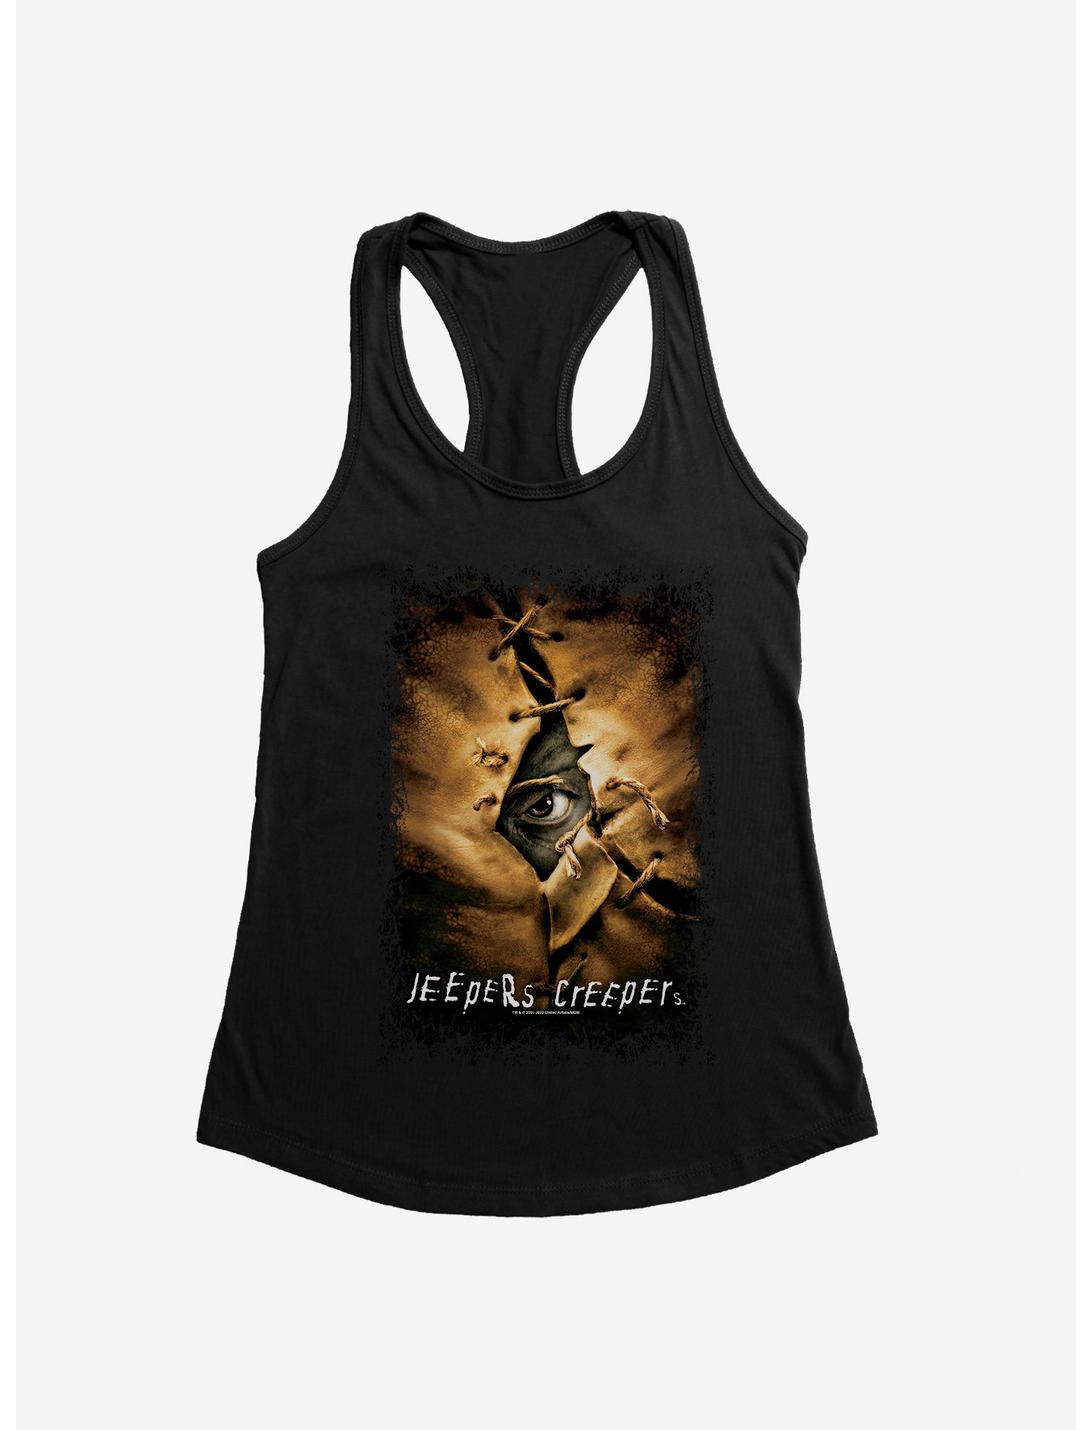 Jeepers Creepers Poster Girls Tank, BLACK, hi-res